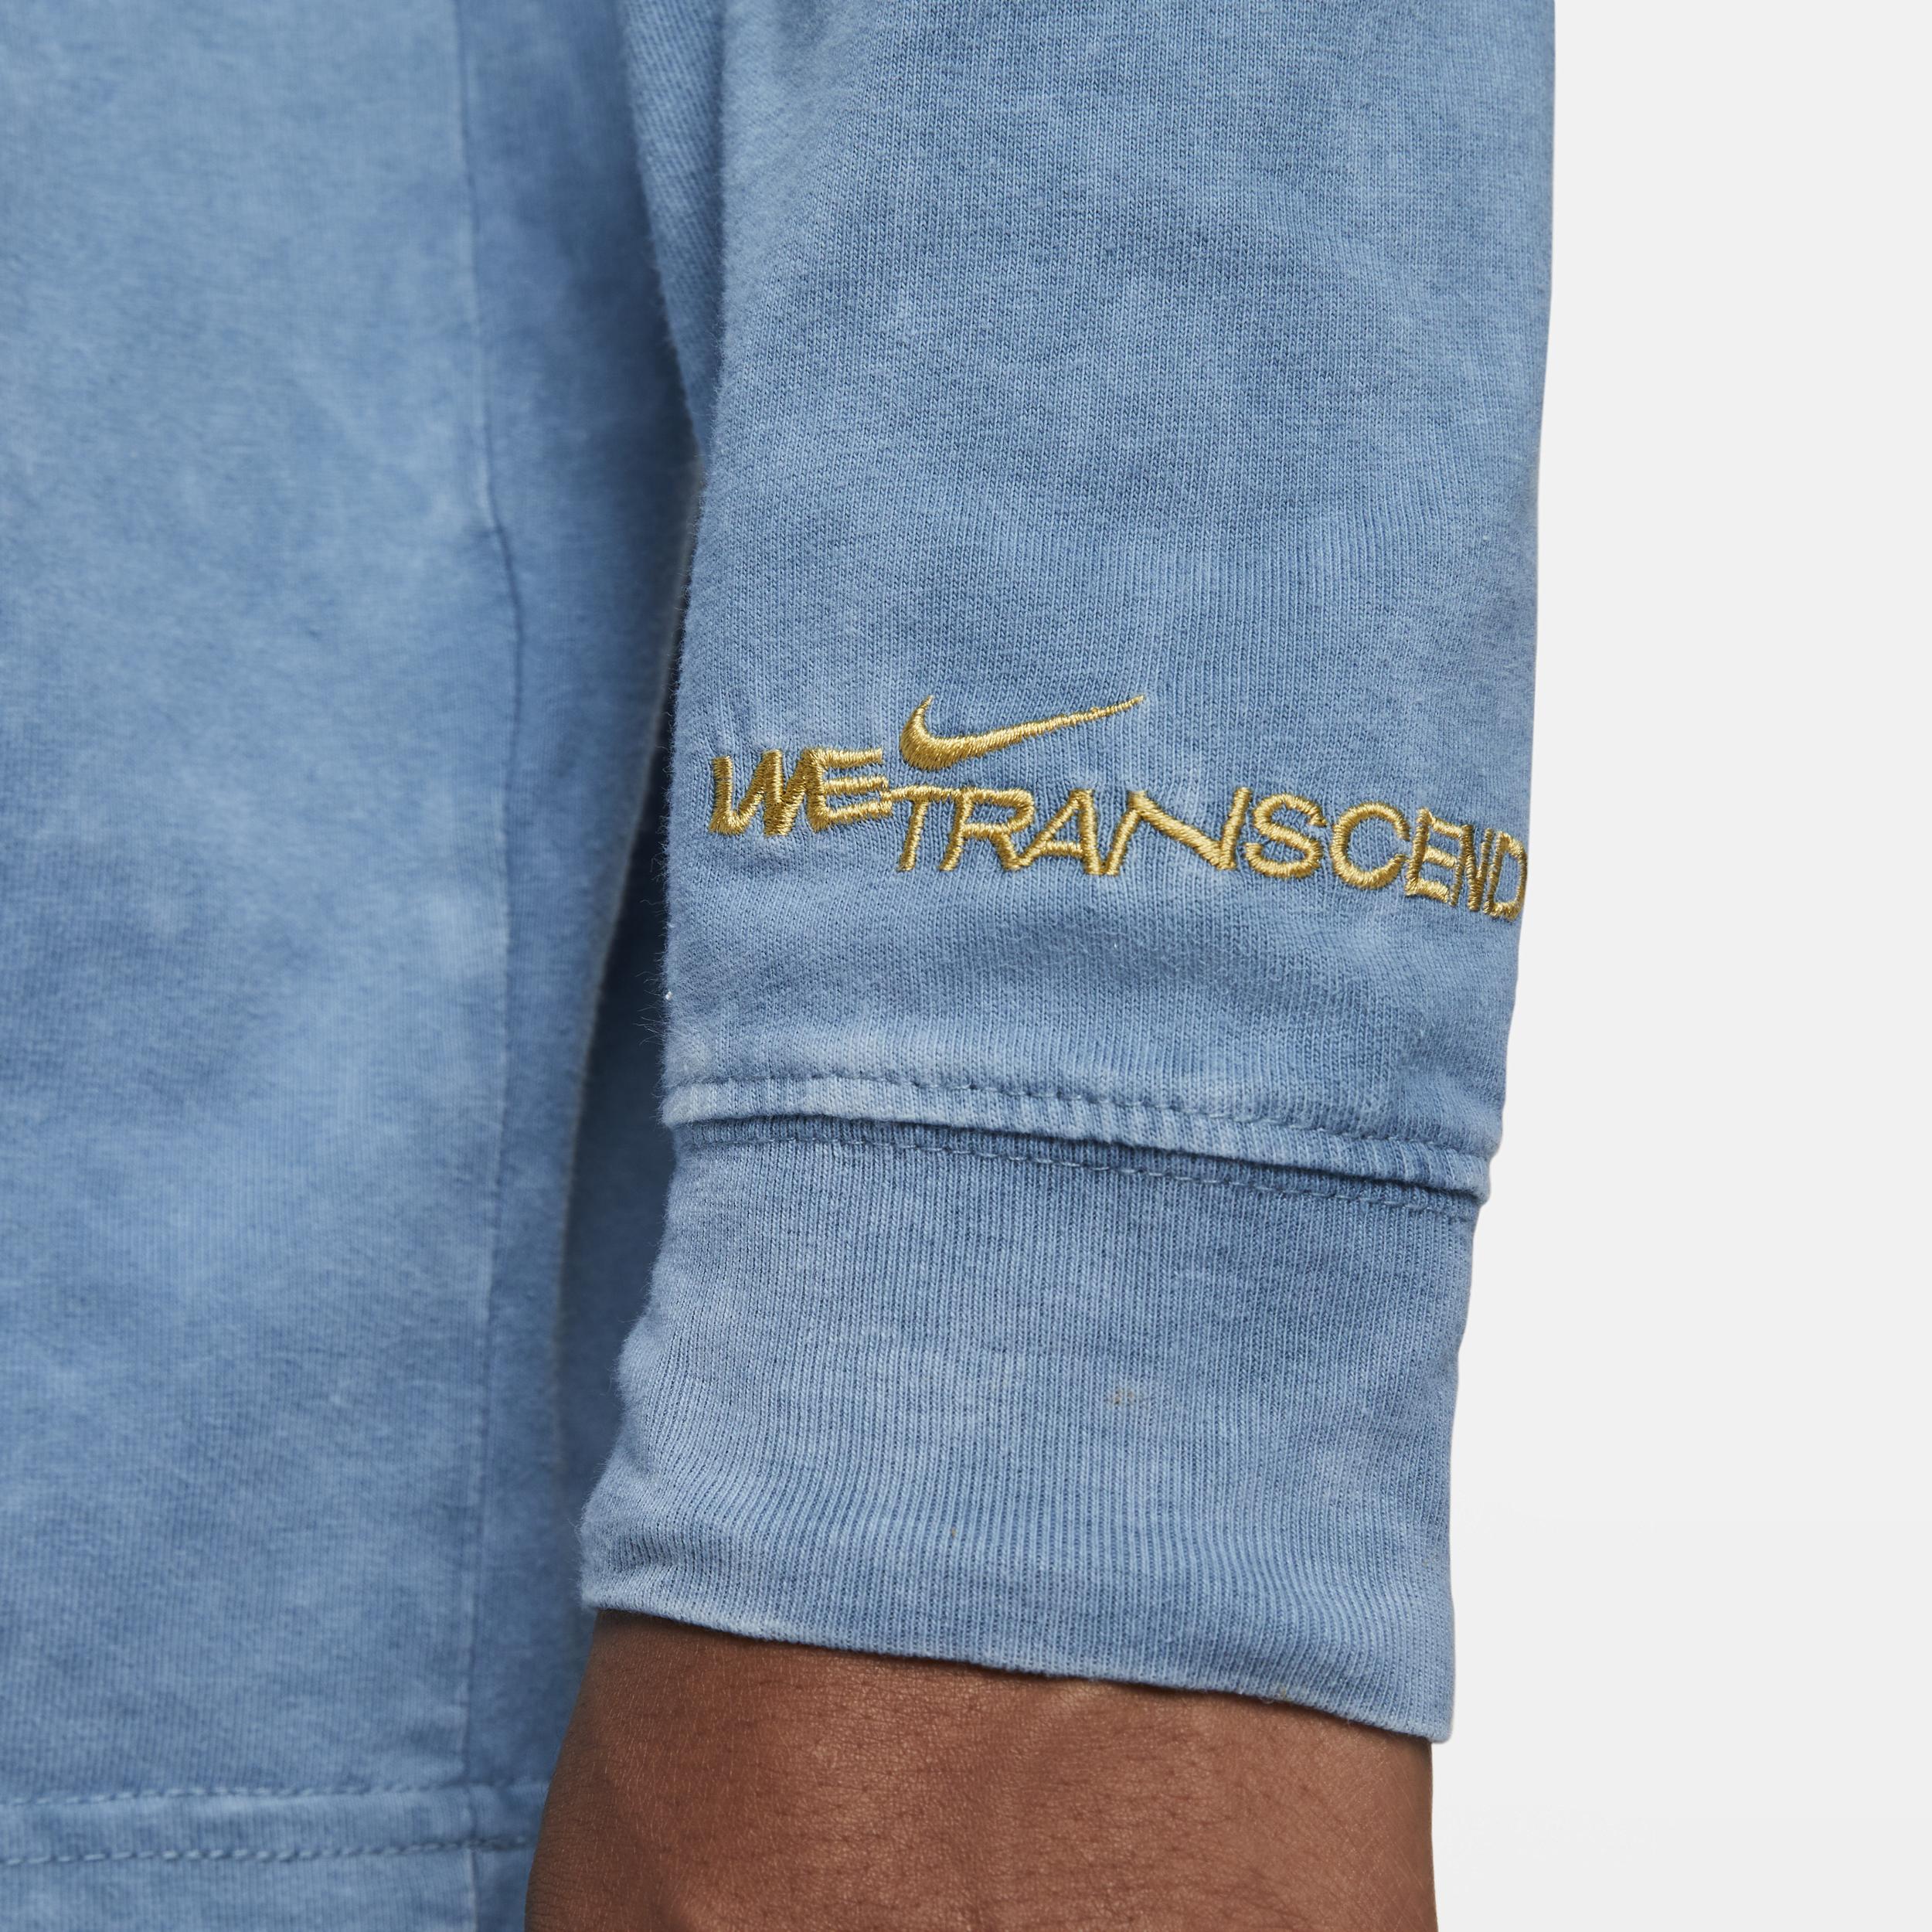 Nike Max90 "we Transcend" Long-sleeve T-shirt In Blue, for Men | Lyst